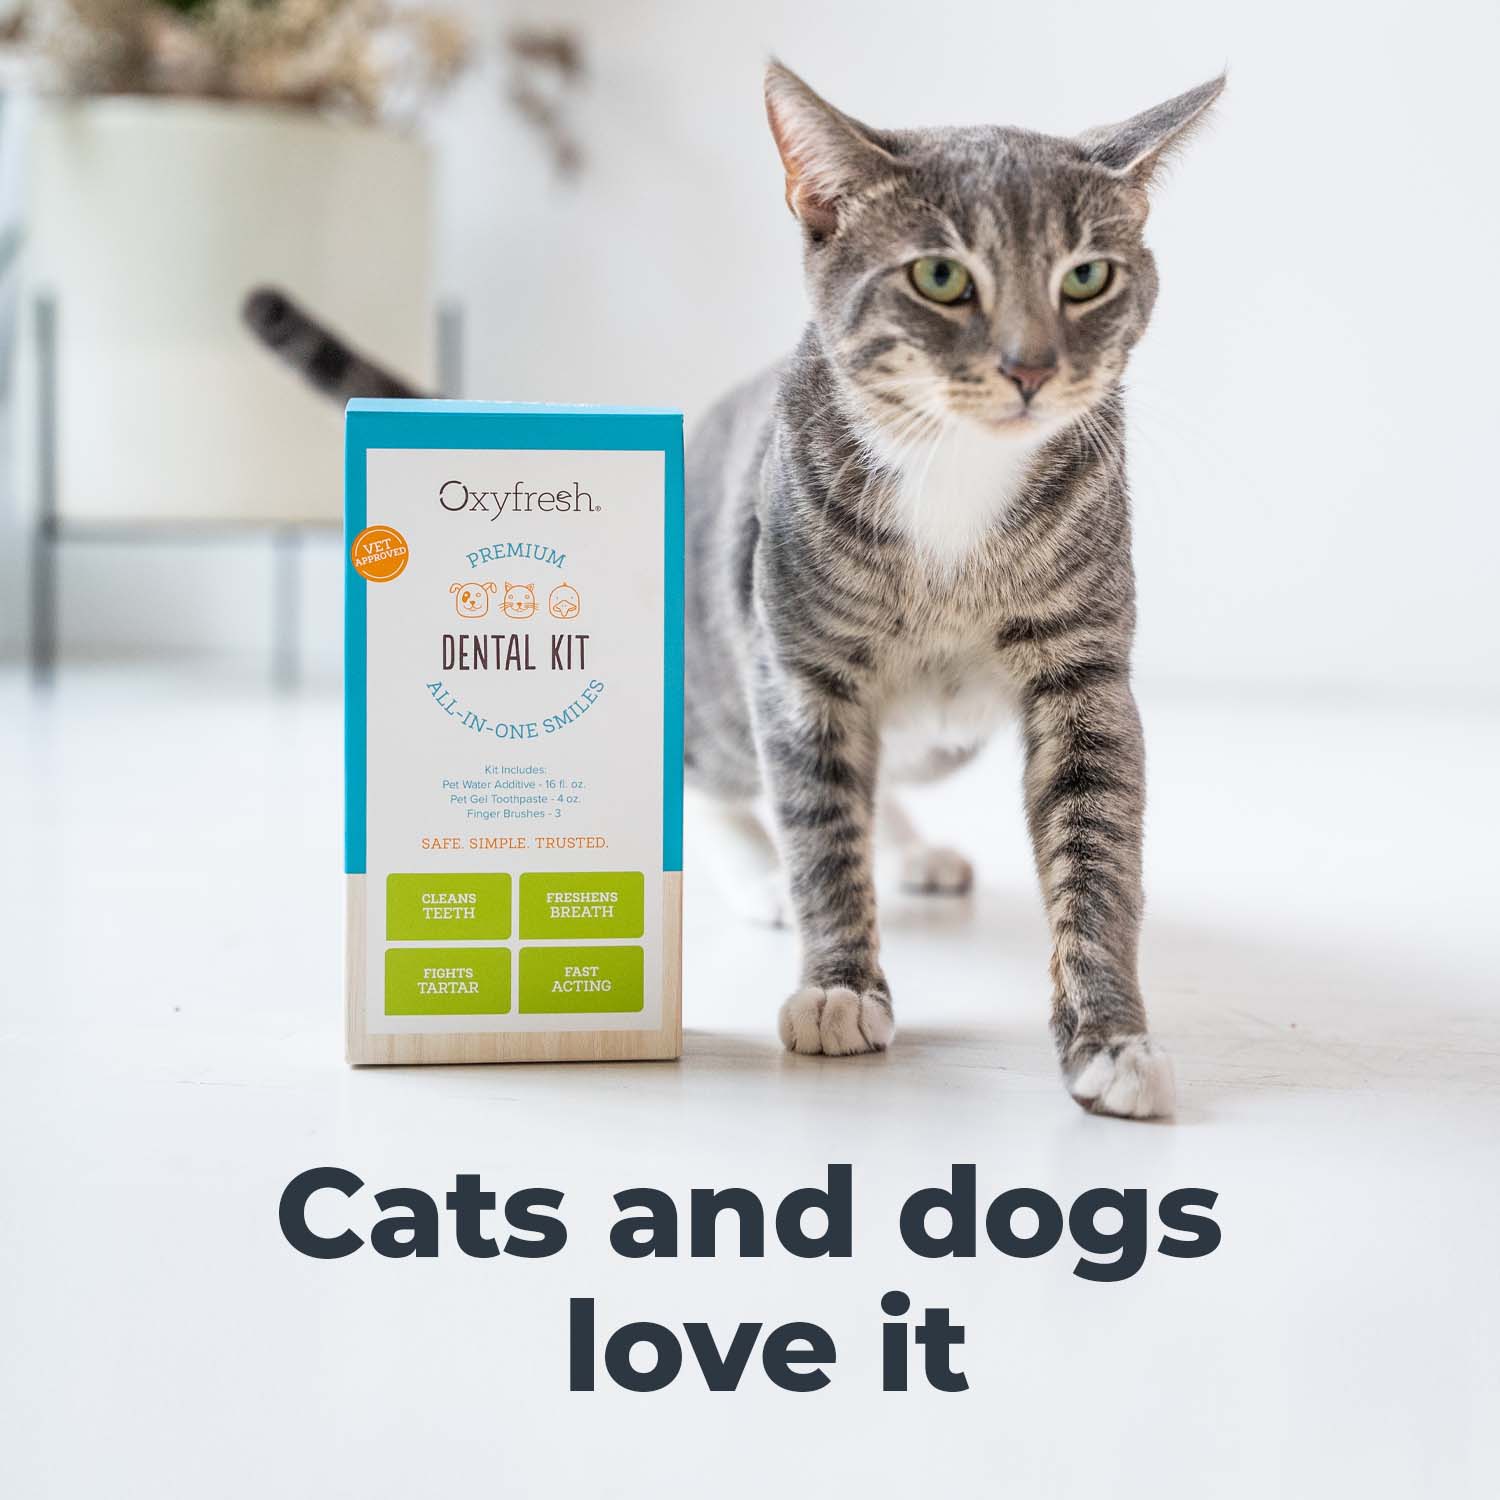 oxyfresh-dental-kit-cats-and-dogs-love-it